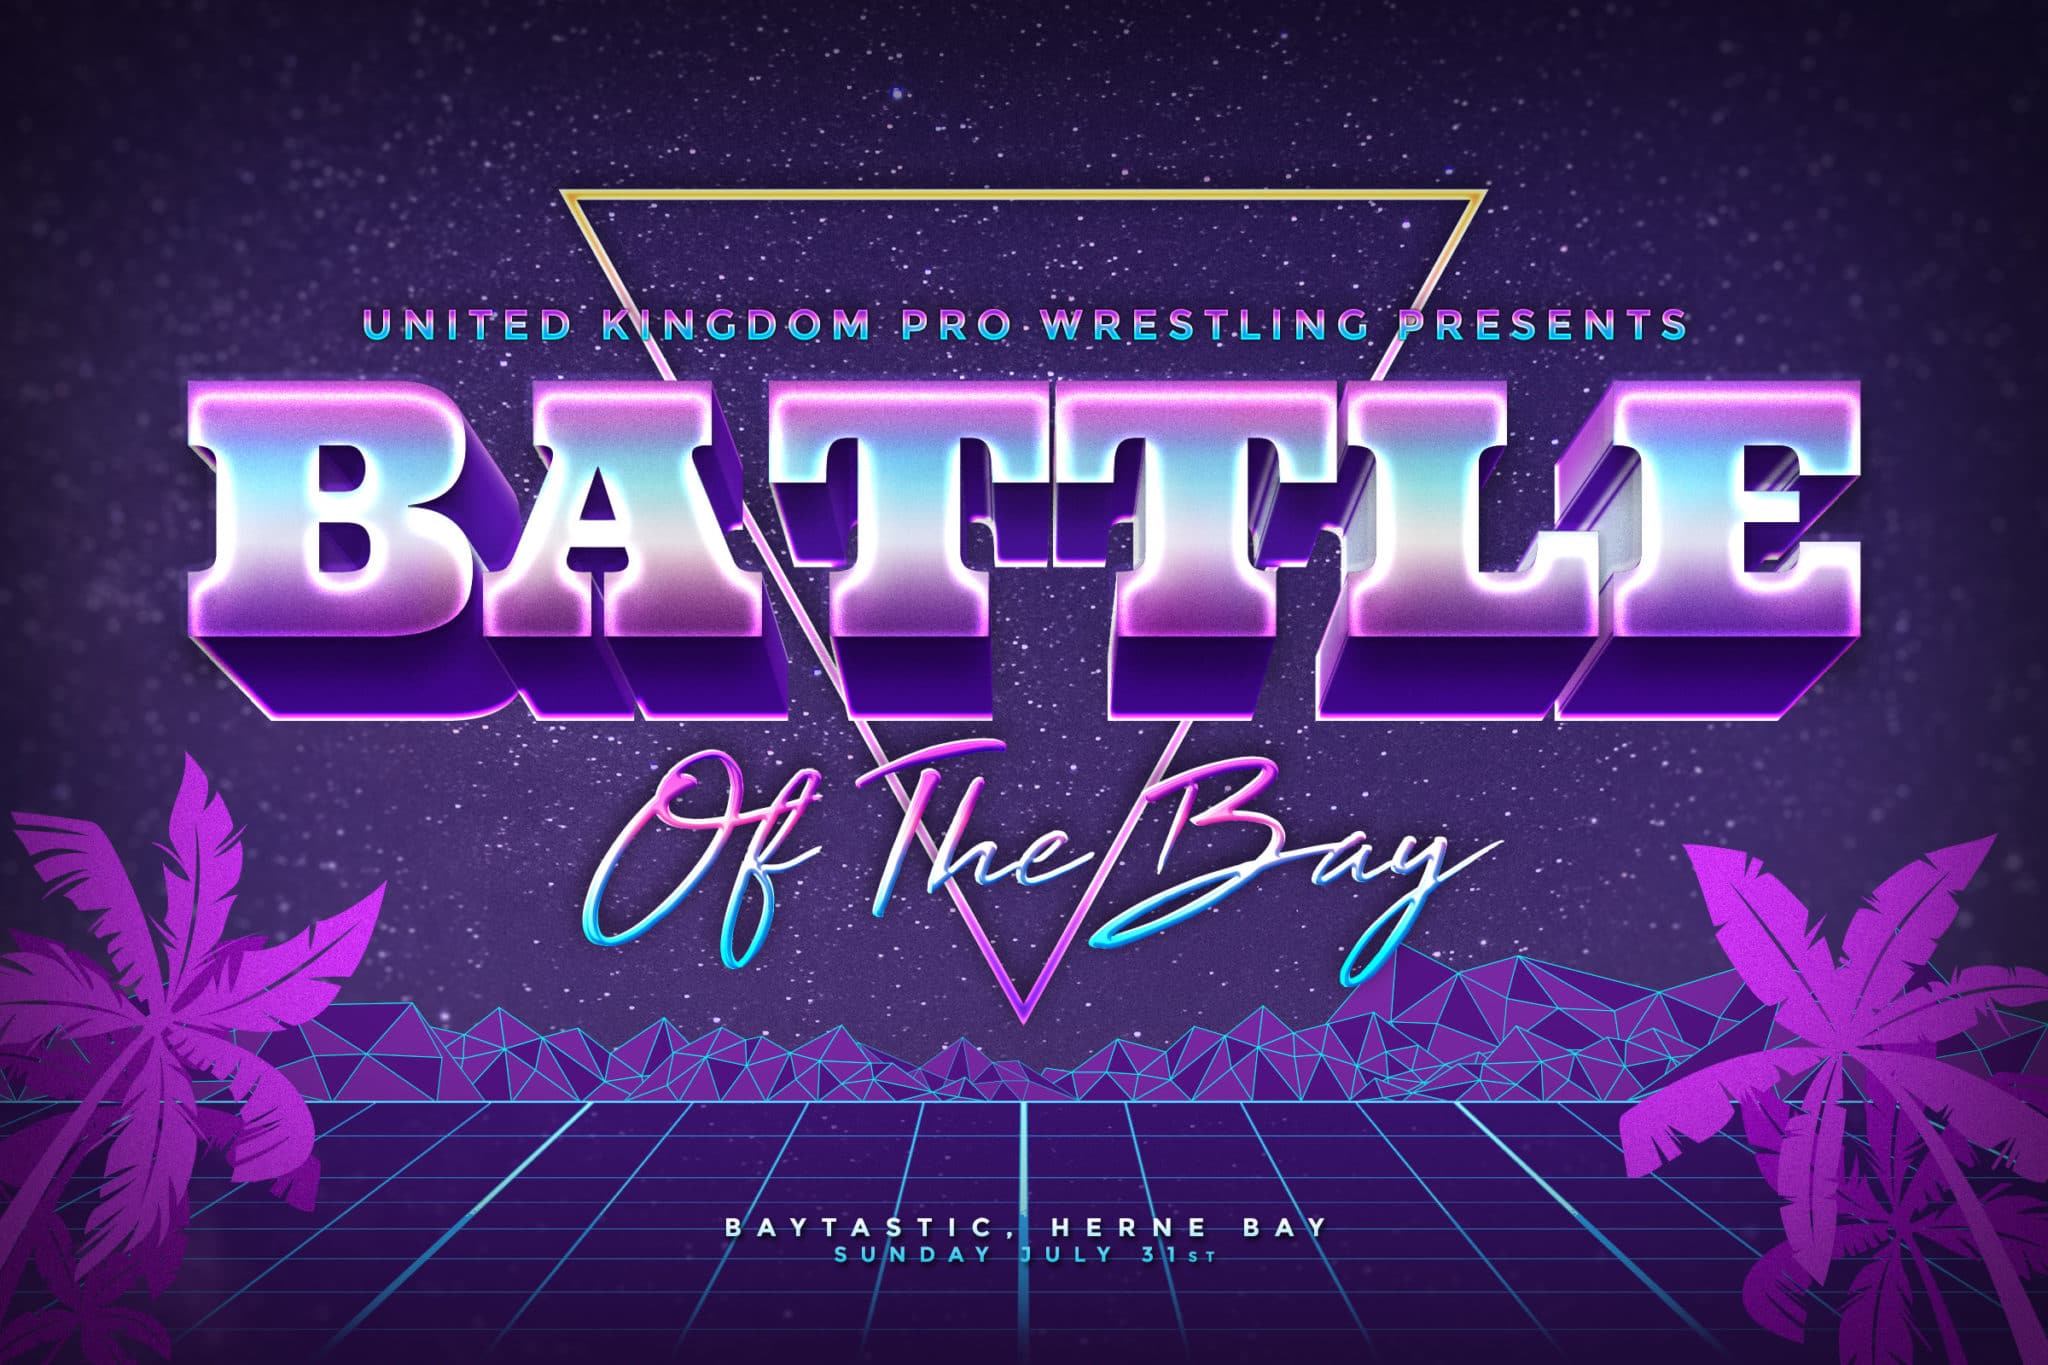 Pro Wrestling — The Battle at the Bay